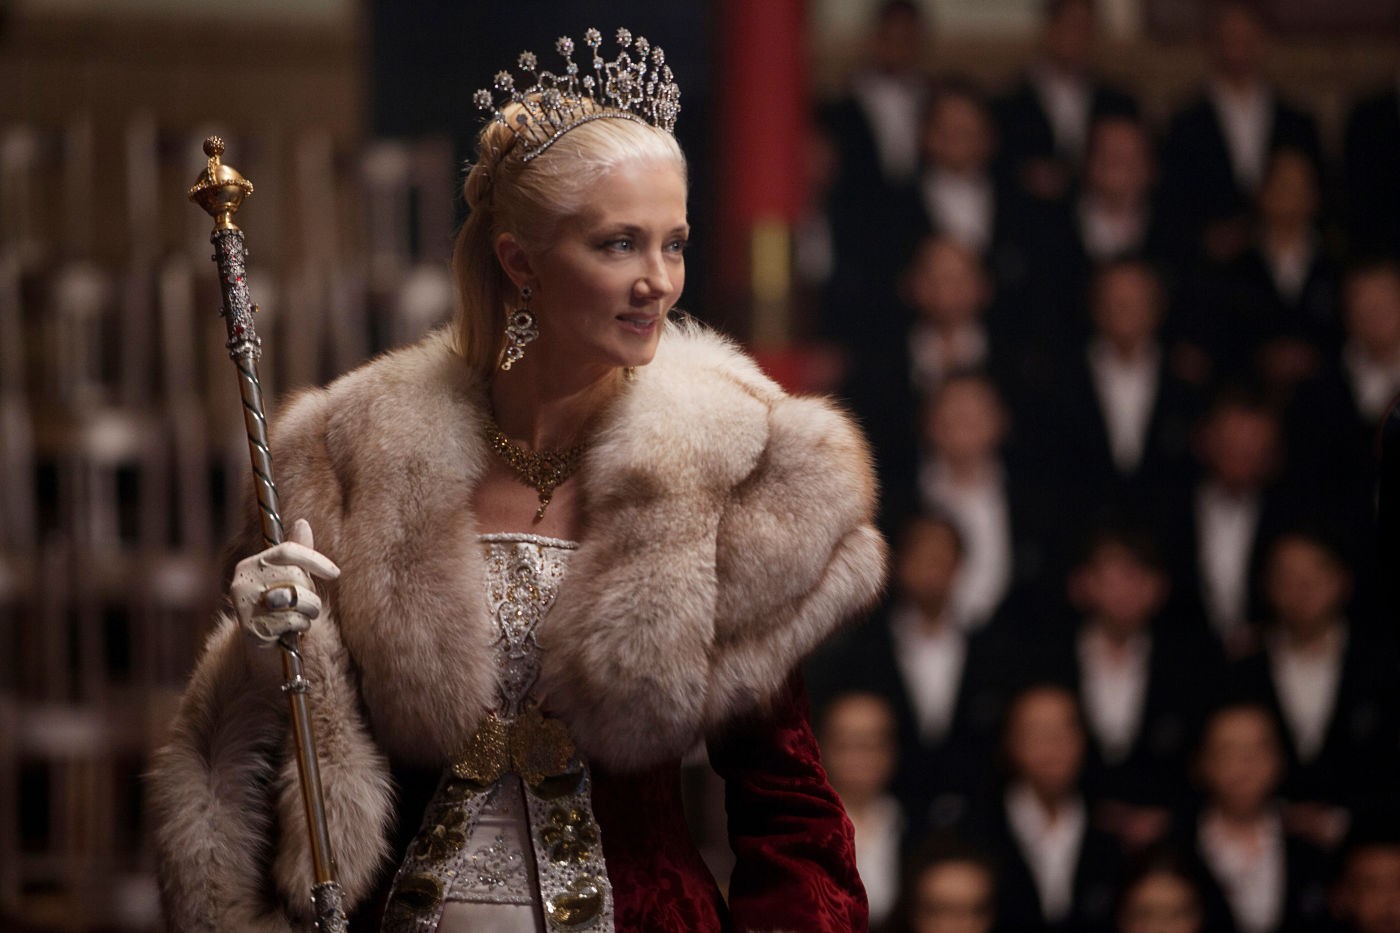 Joely Richardson stars as Queen Tatiana in The Weinstein Company's Vampire Academy (2014)